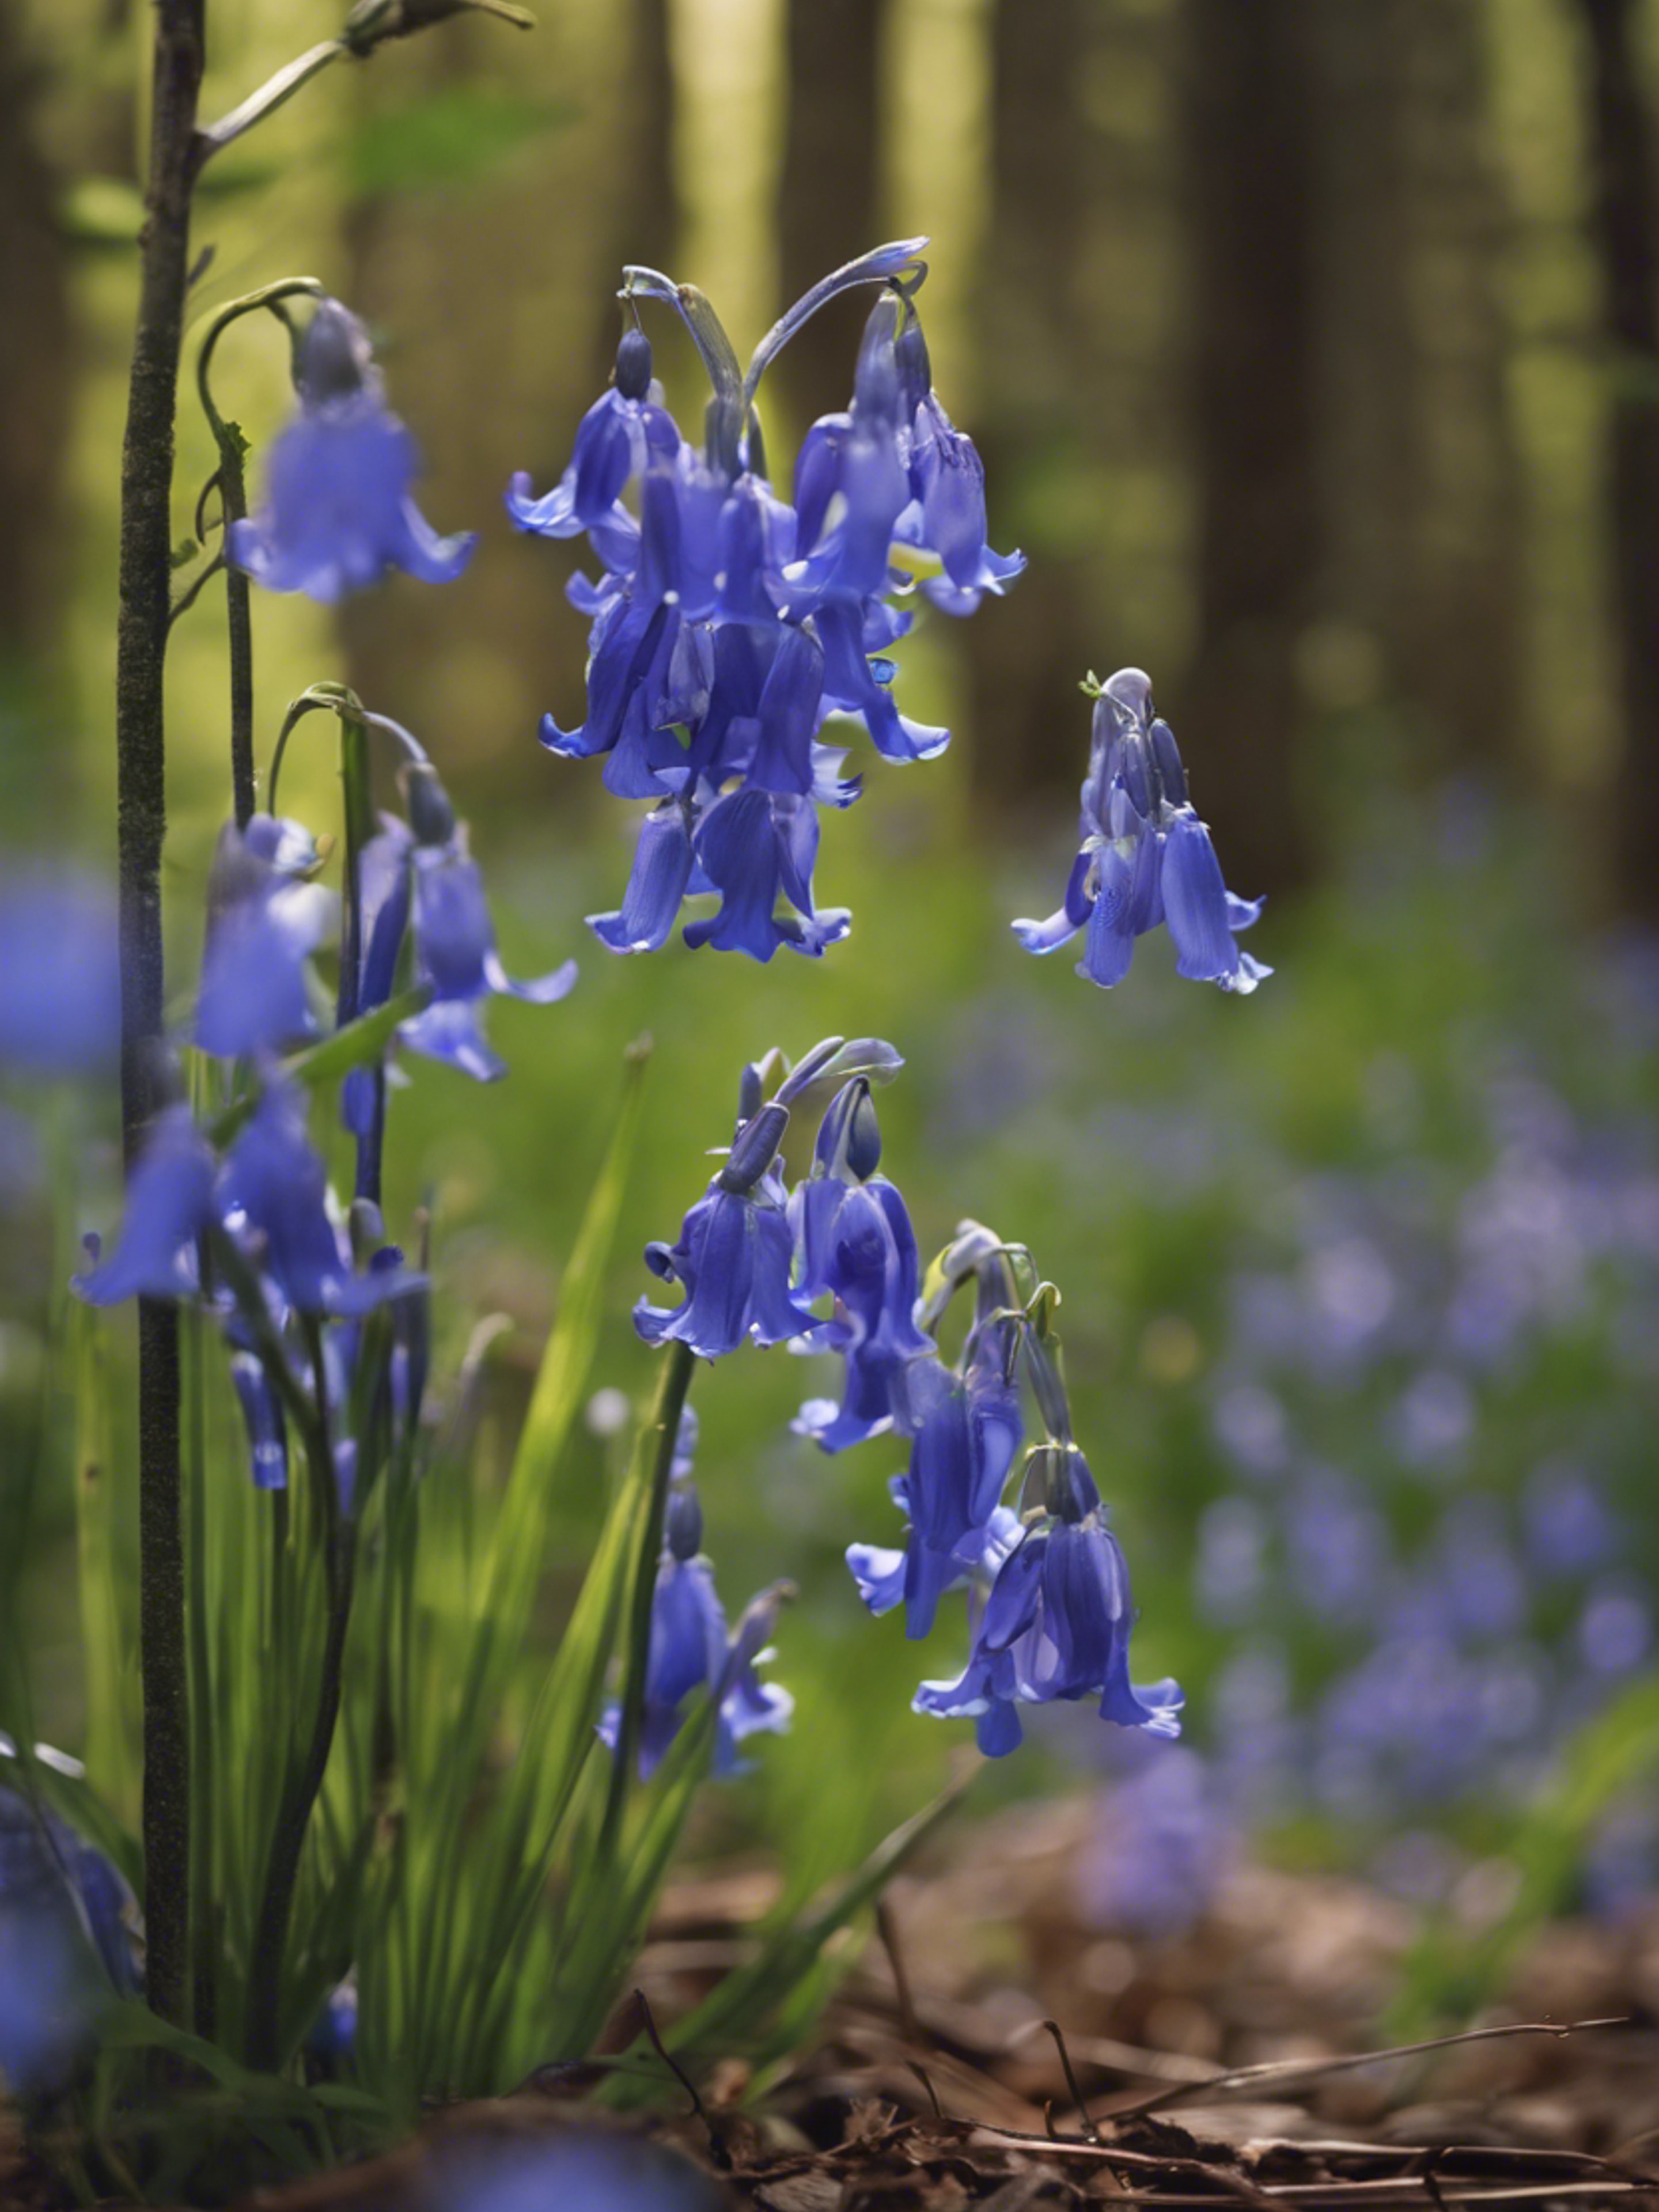 A cluster of bluebells growing in the heart of a dense, untouched forest. Обои[e9ac2ad9f62f40e2a0af]